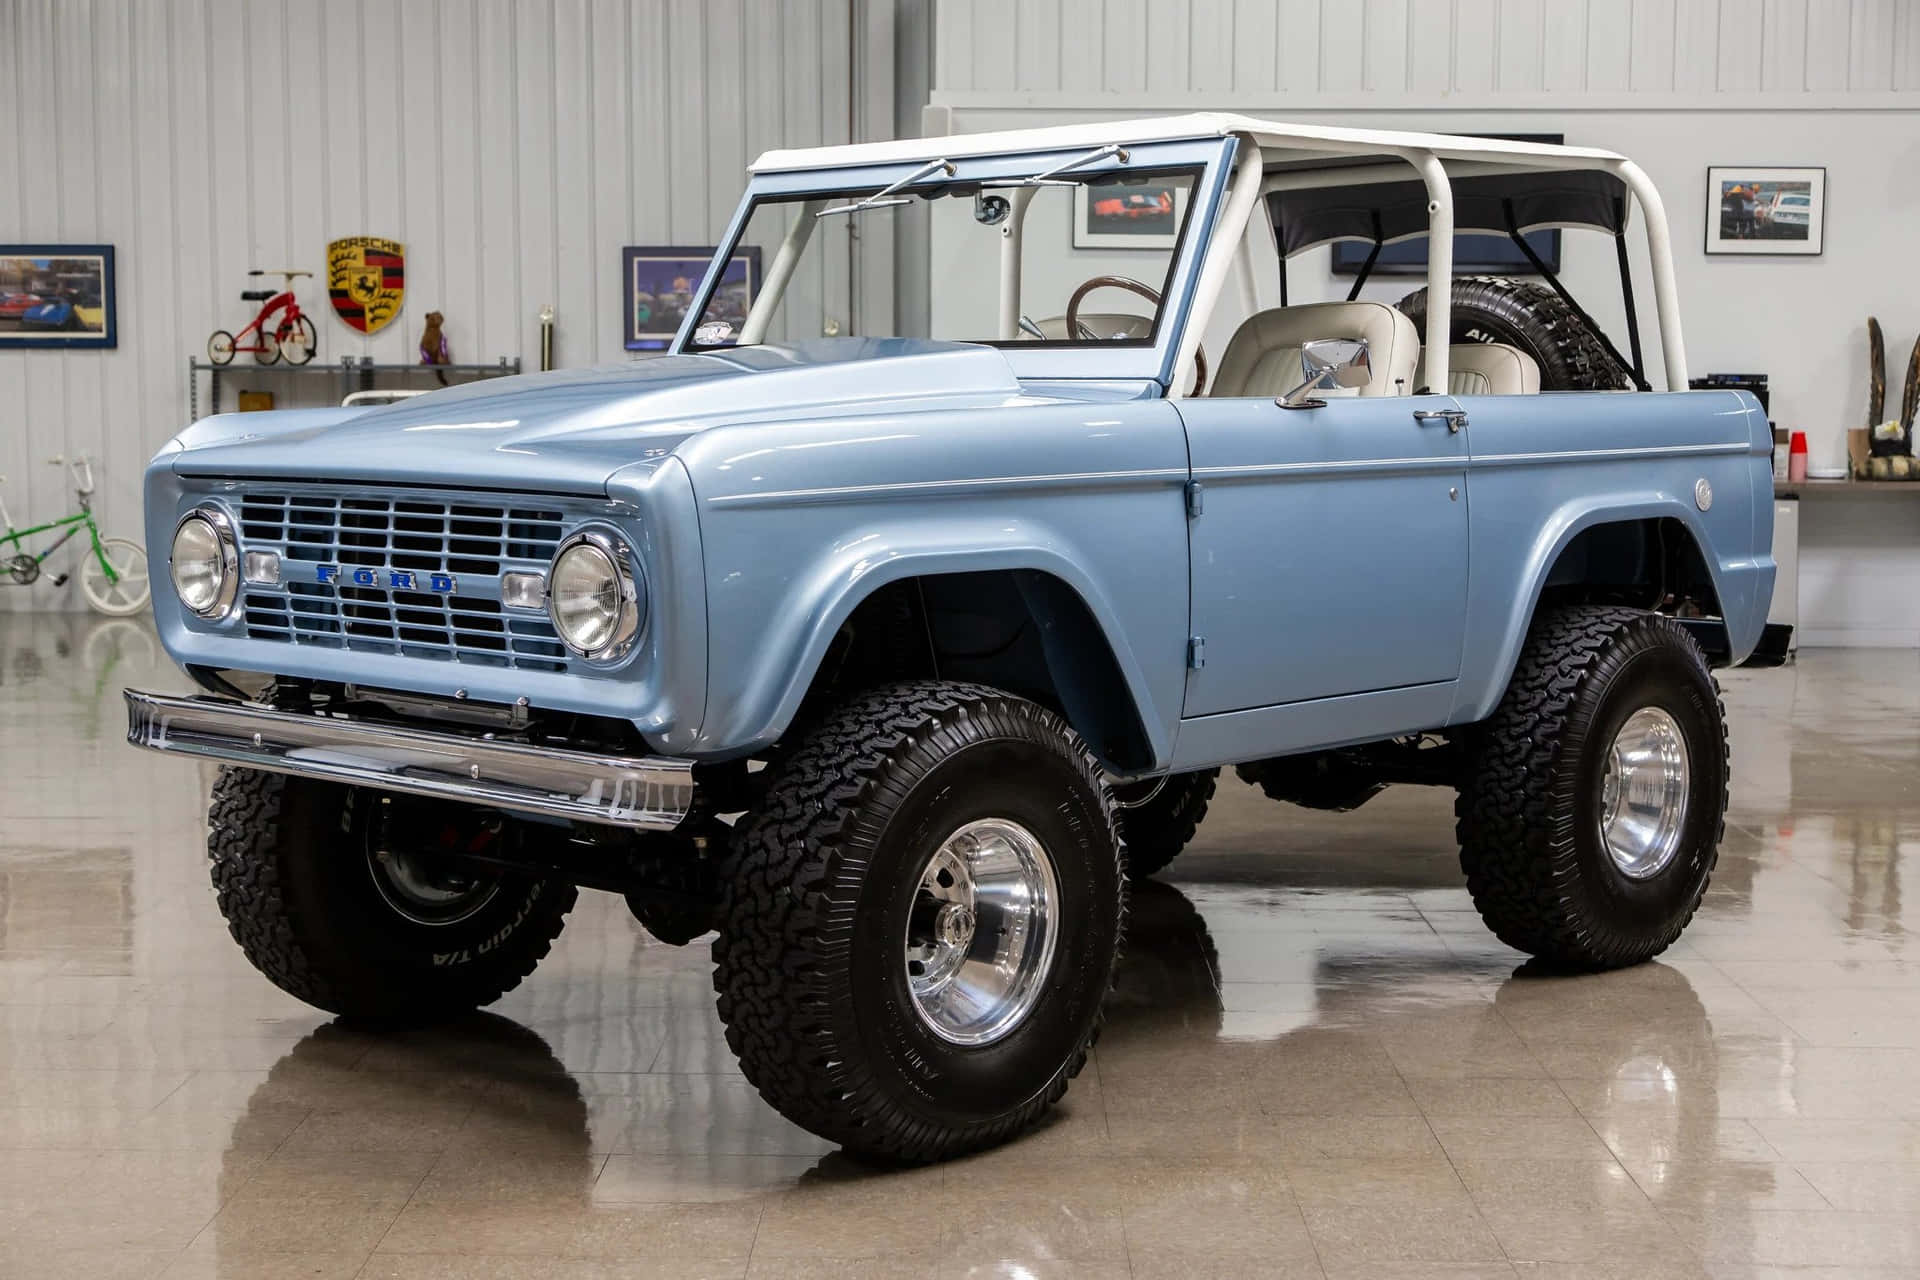 Ford Bronco - A Timeless Classic